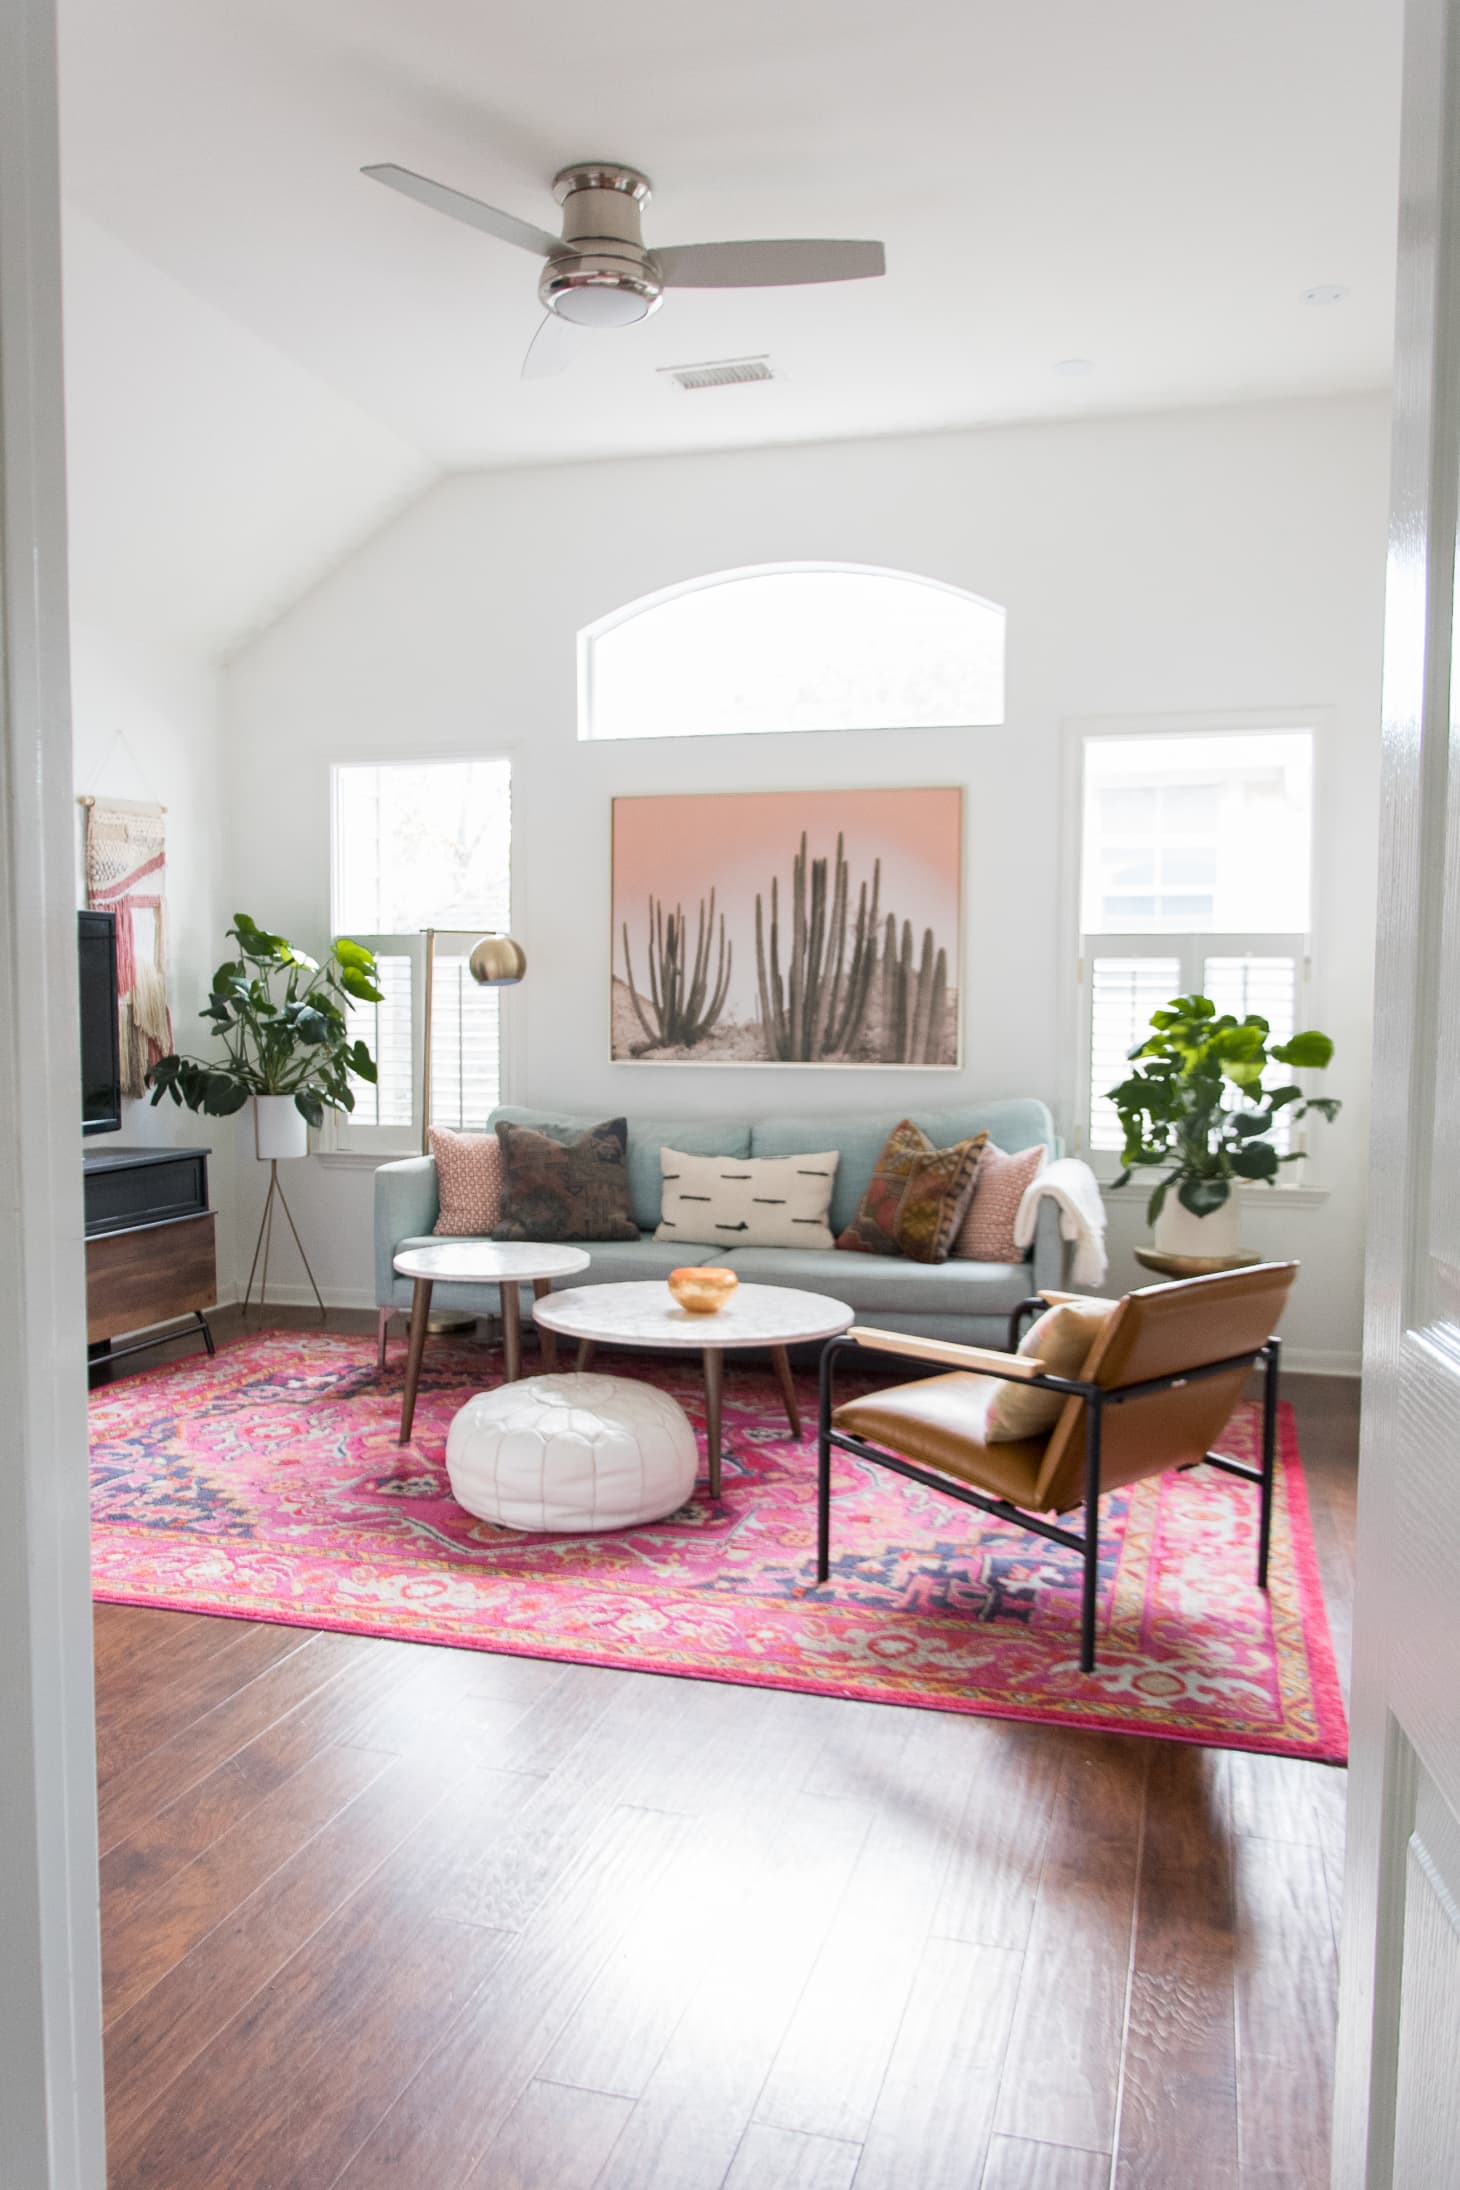 How To Decorate A Small Living Room: Maximize Space With Creative Design Solutions